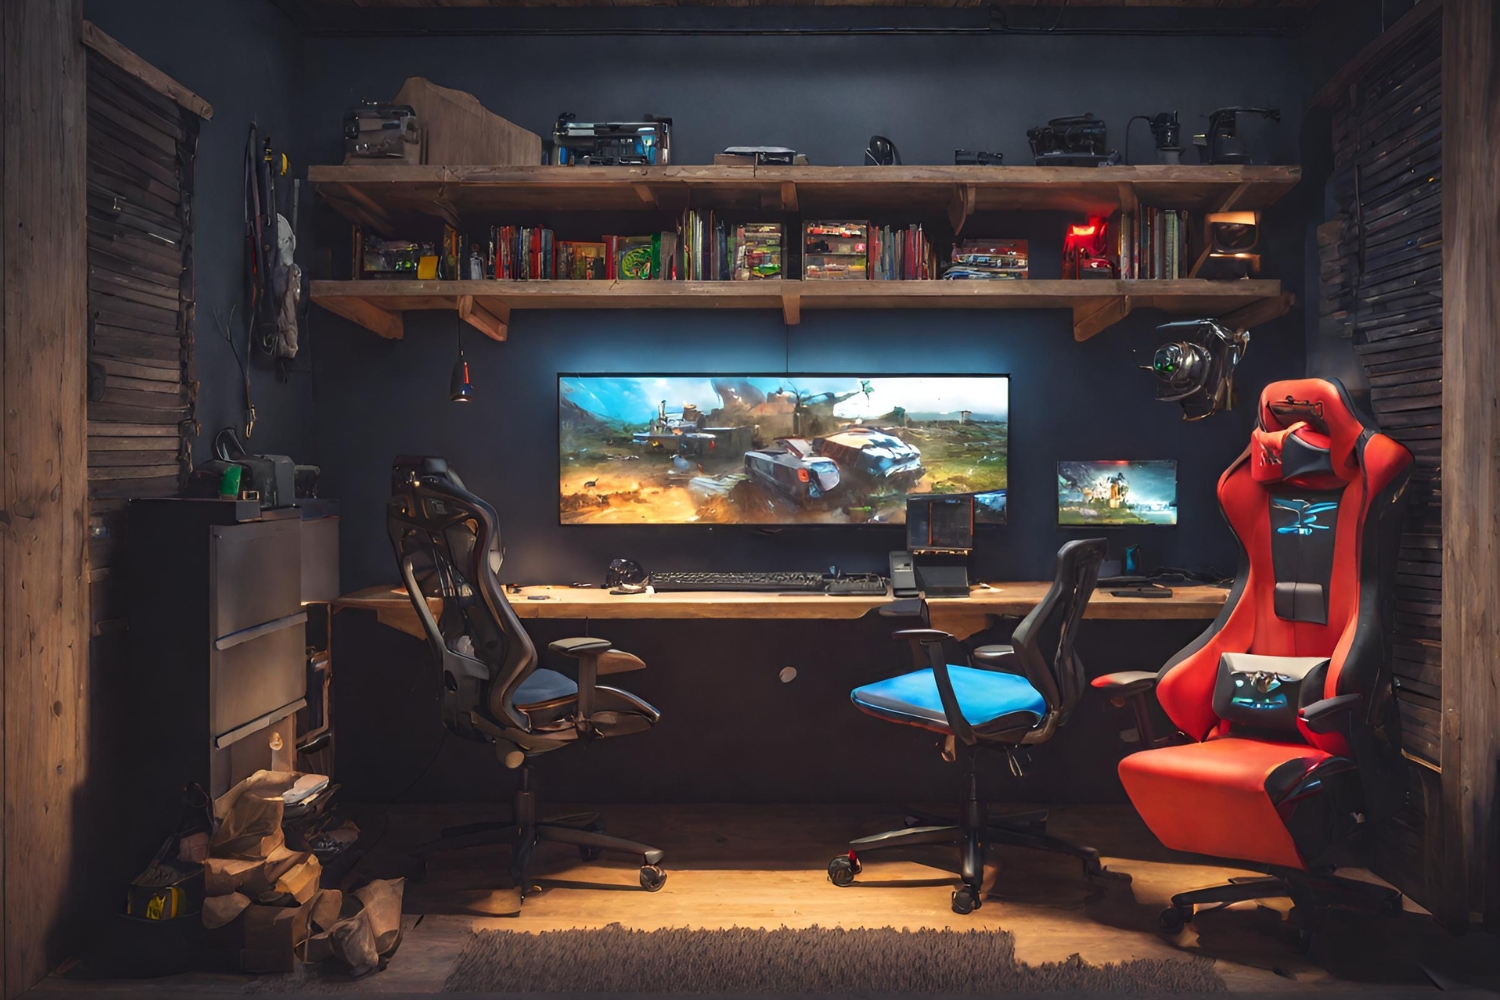 Pixel Perfect Decor is Launched, Providing Gamers Room Design Ideas